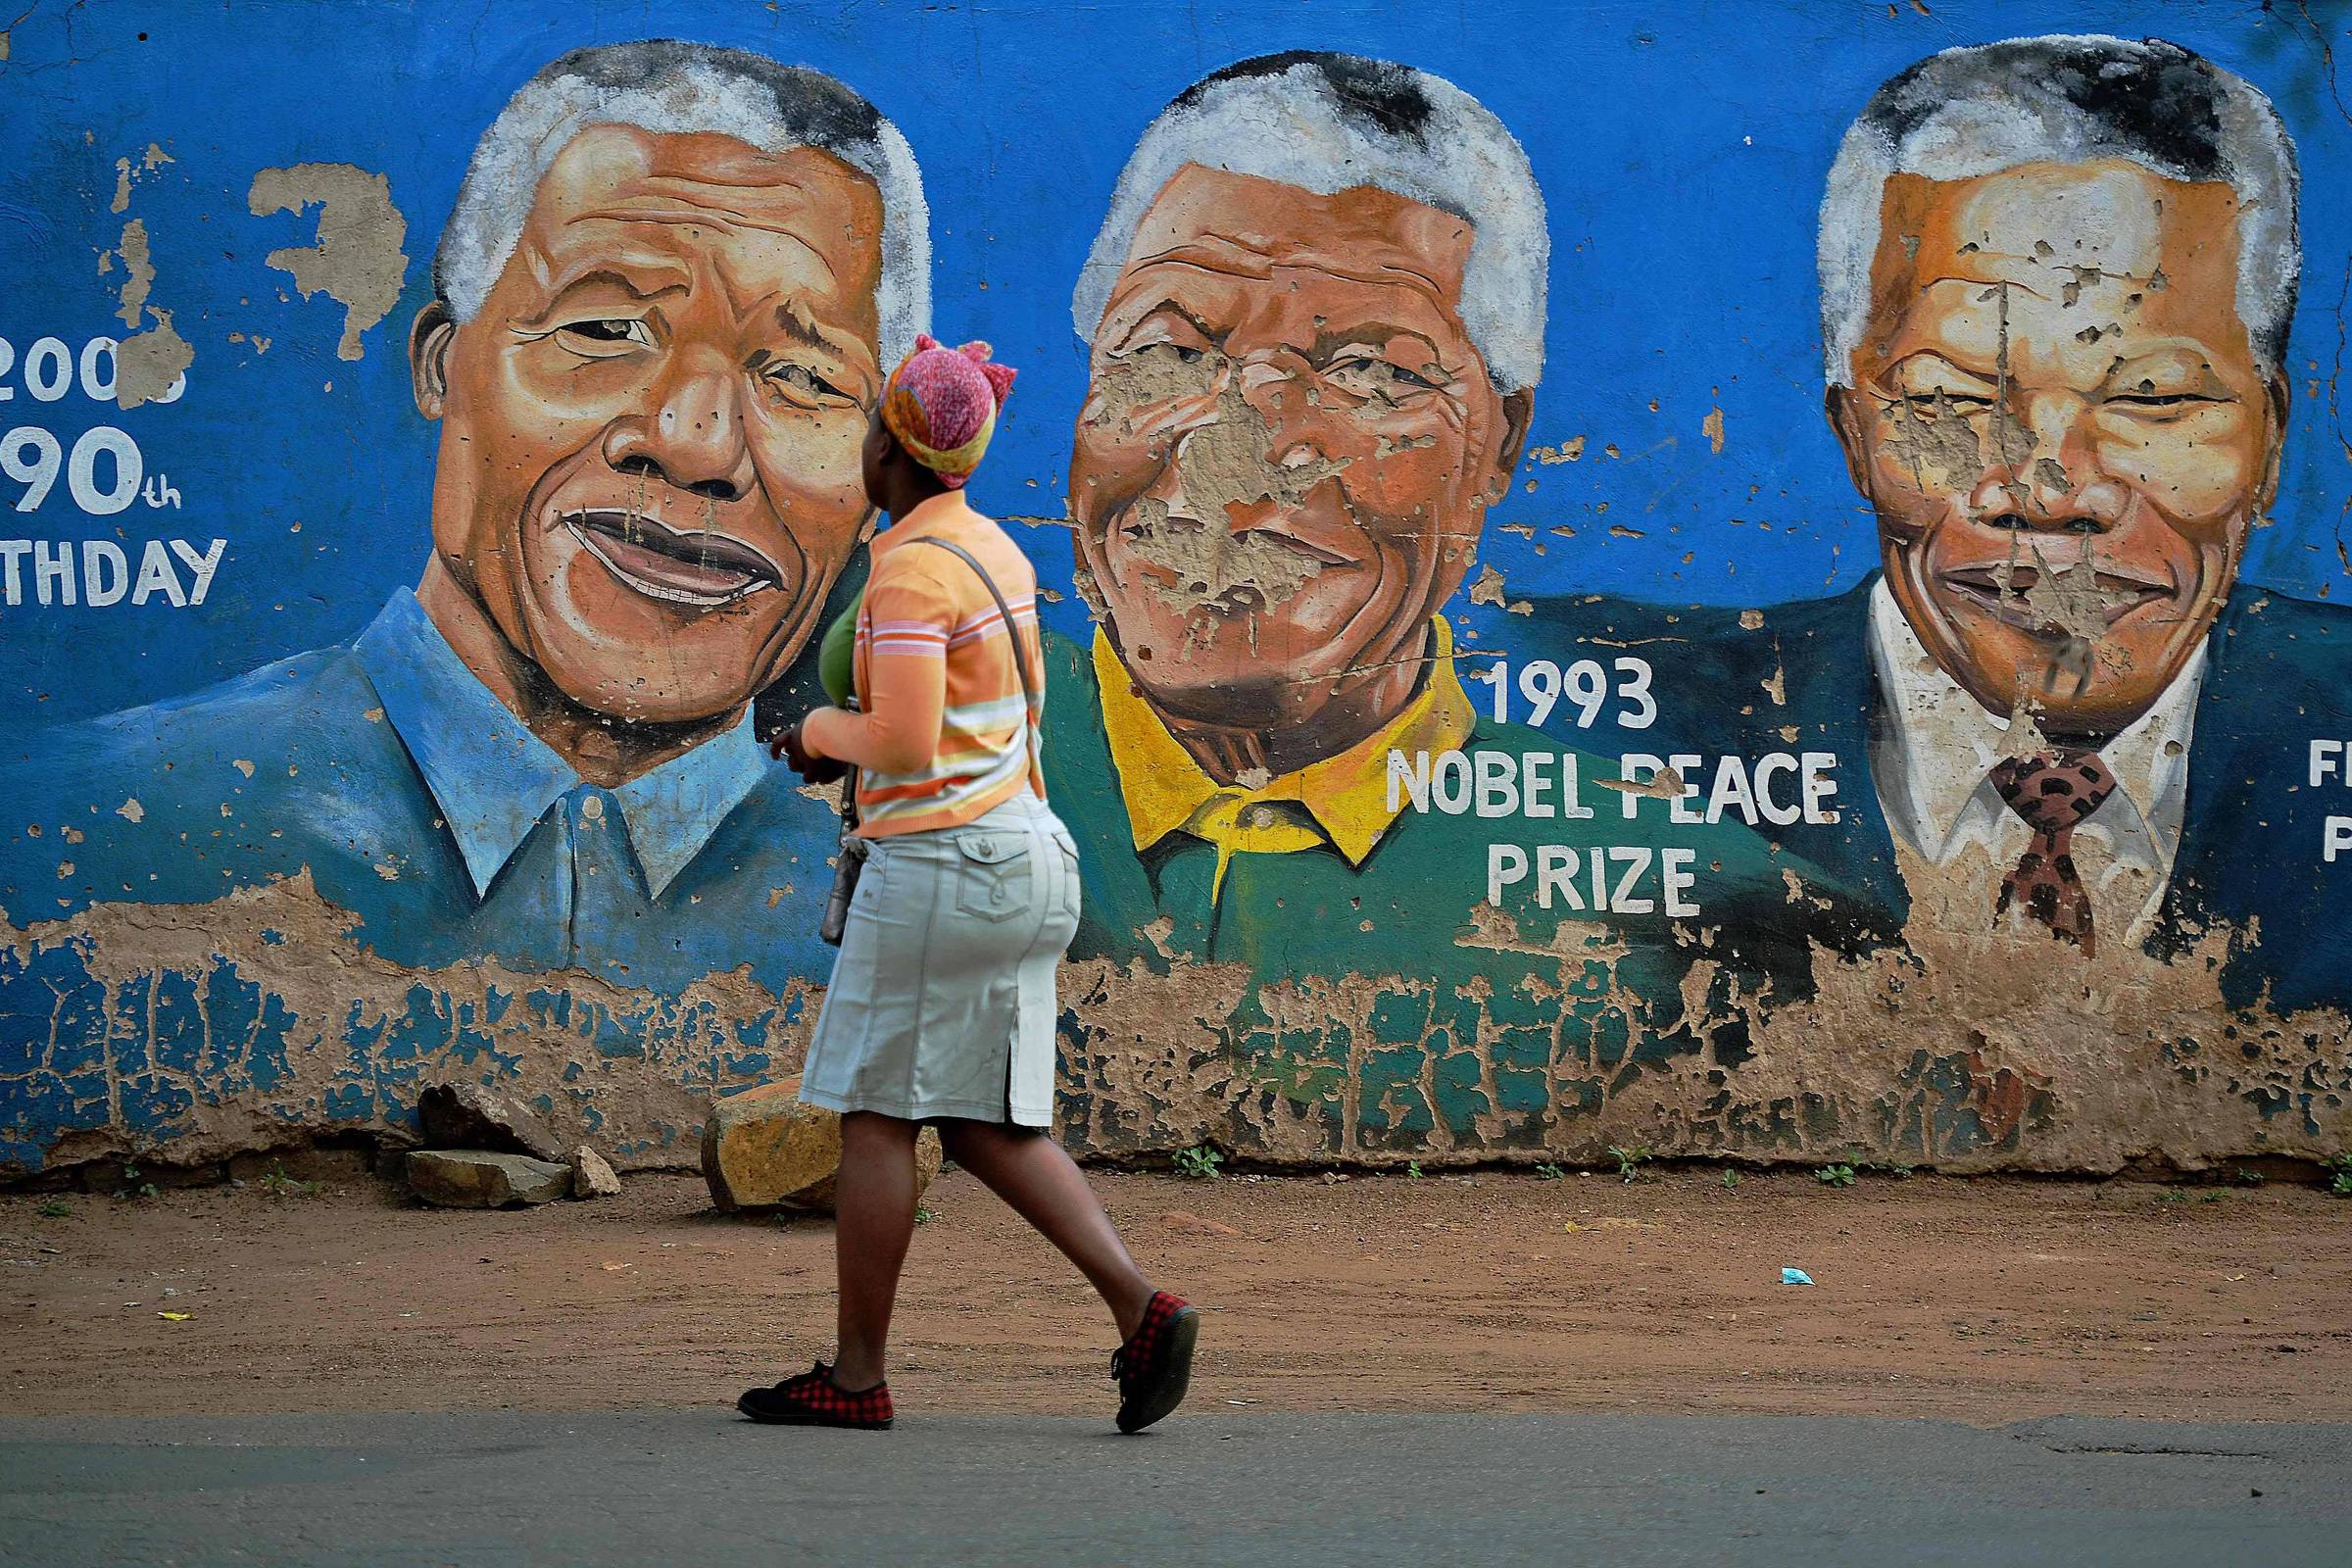 South Africa becomes an economic and social melting pot ten years after Mandela’s death